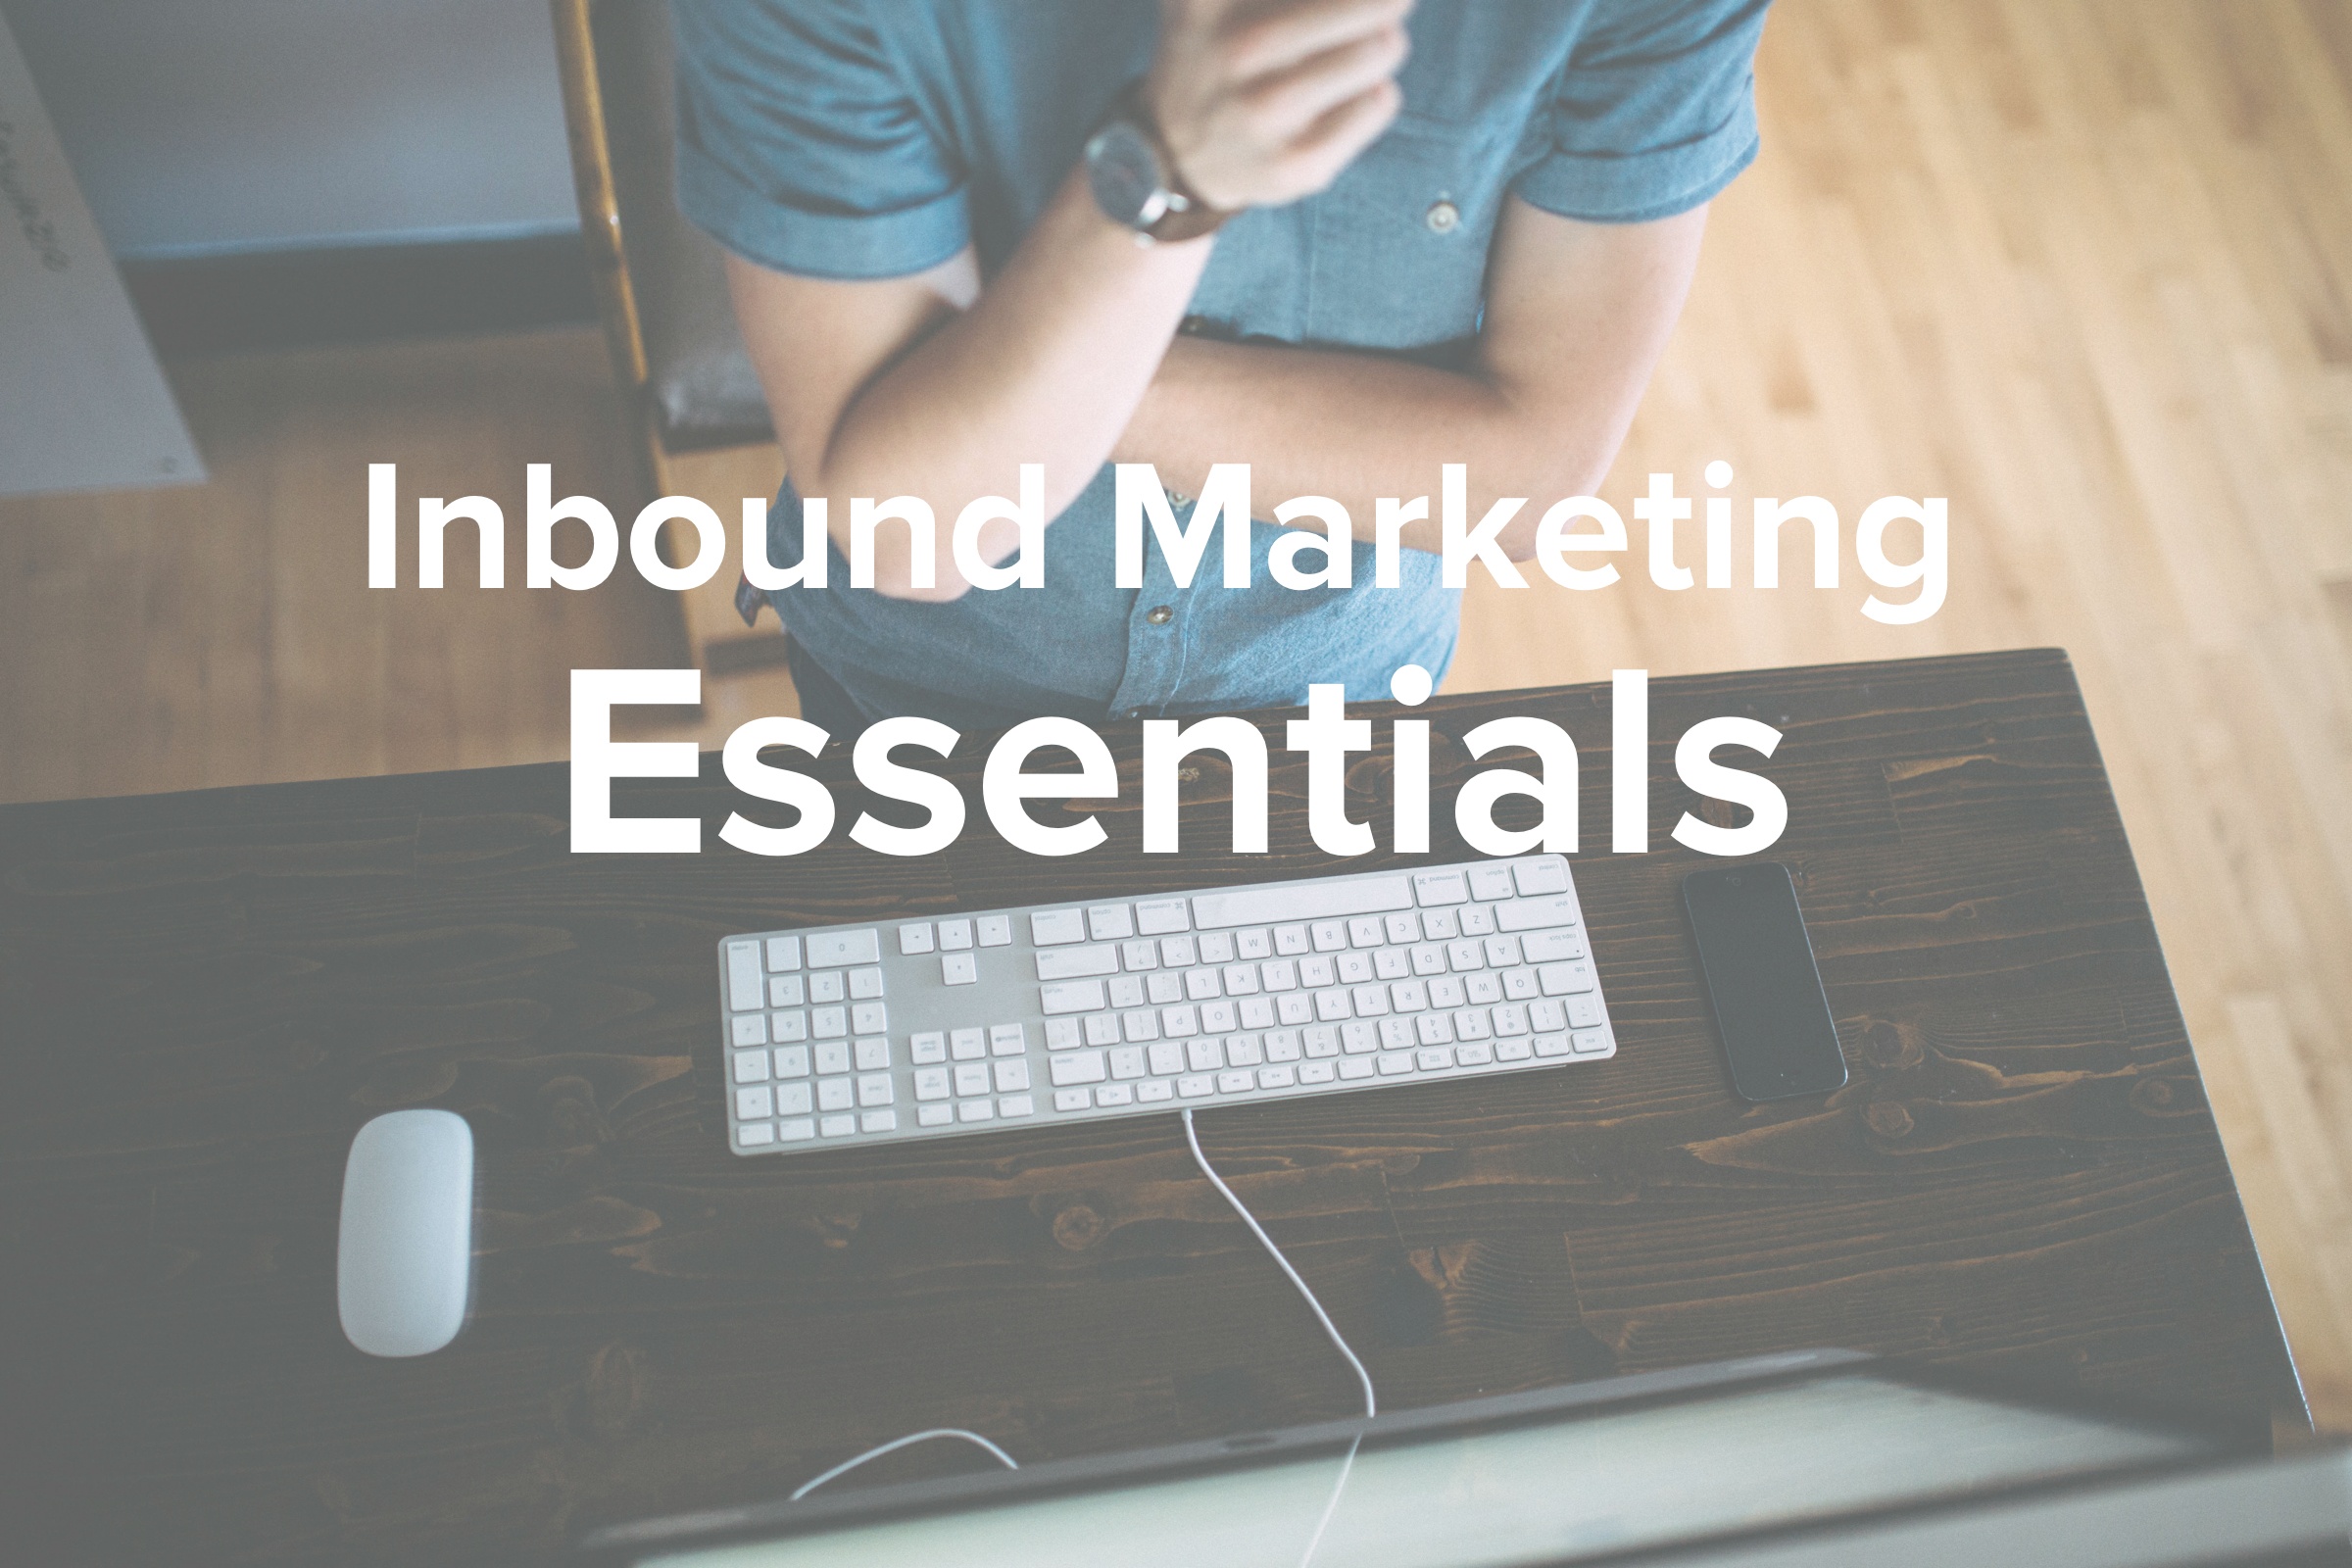 Inbound marketing essentials for attracting, closing, converting, and delighting customers.